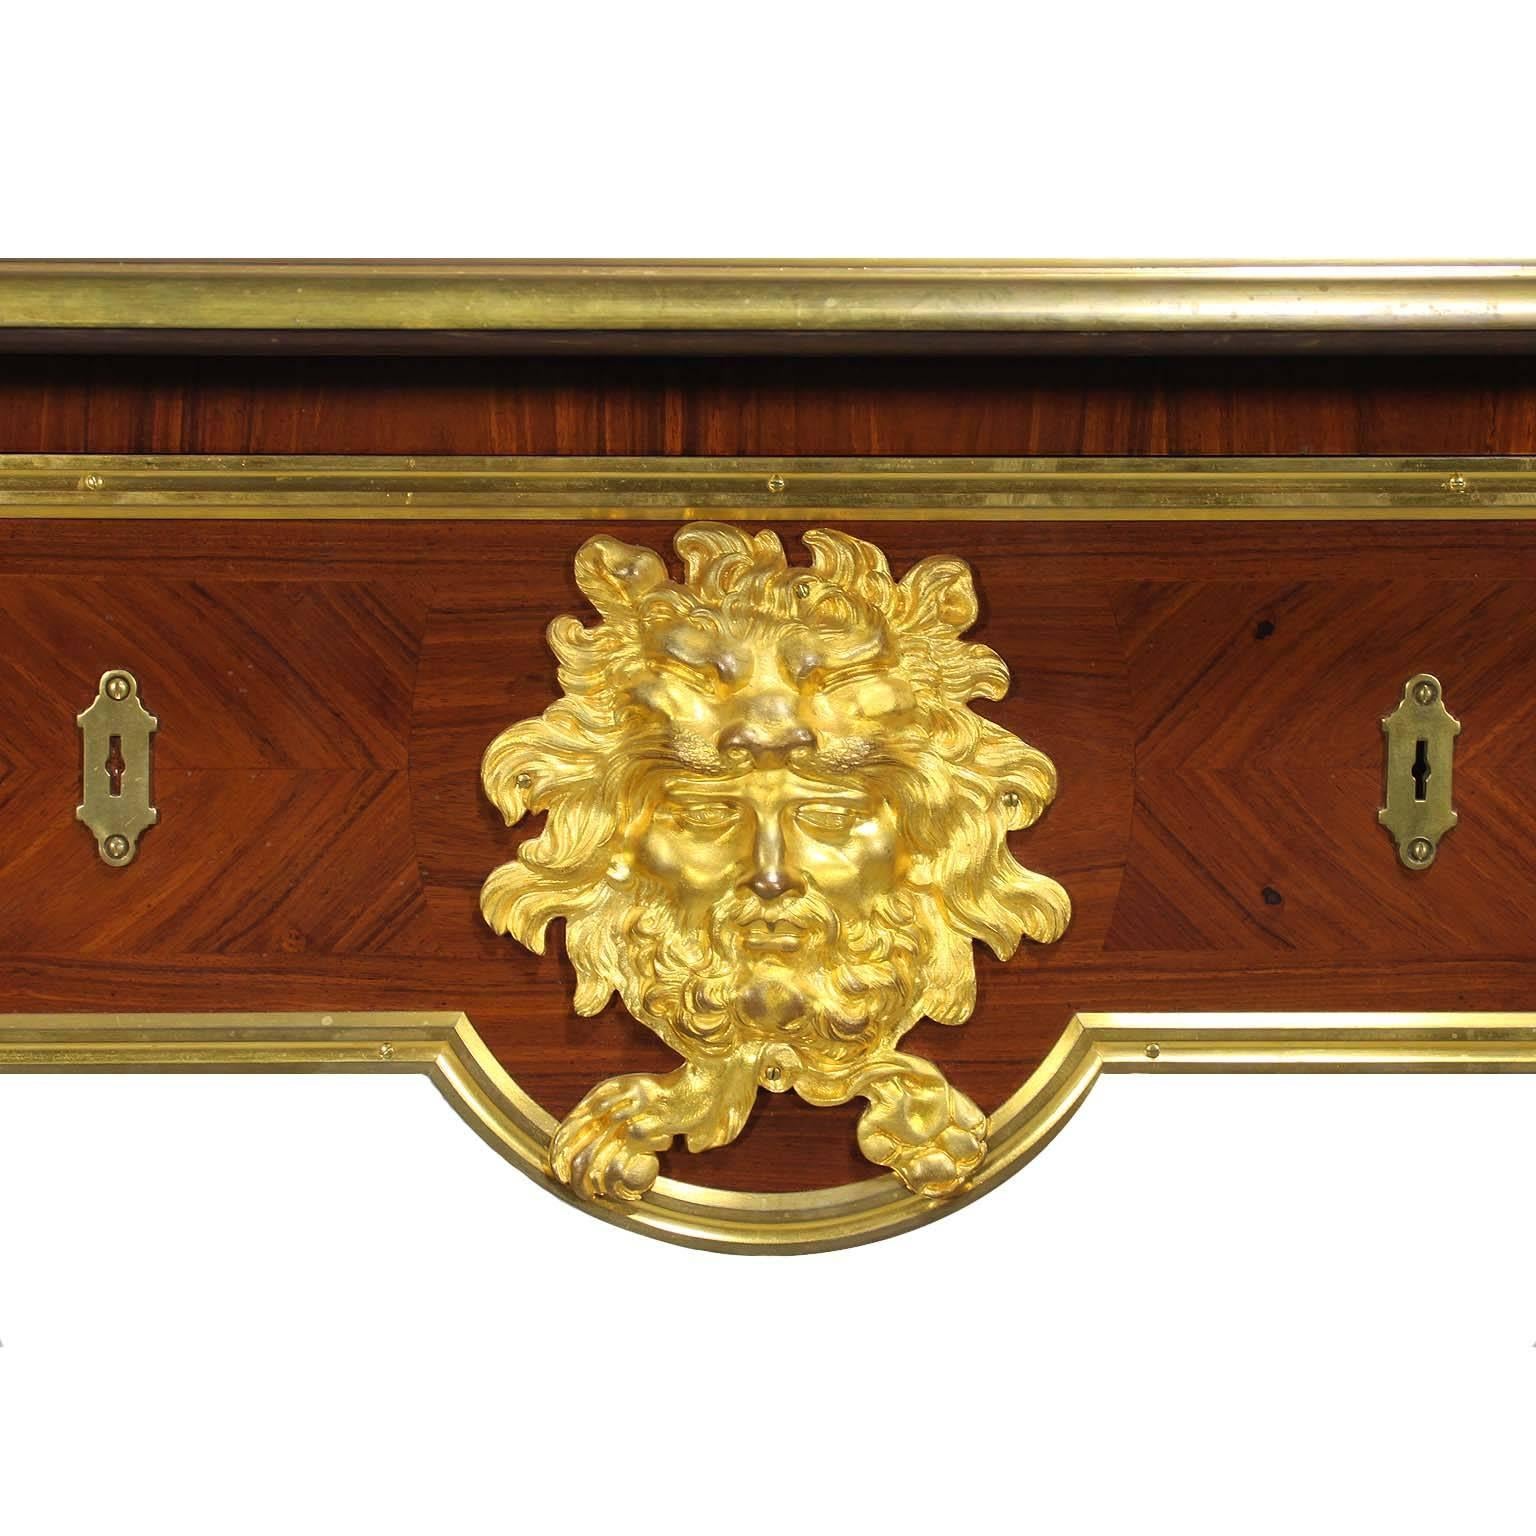 French 19th Century Louis XV Style Ormolu-Mounted Bureau Plat Desk In Good Condition For Sale In Los Angeles, CA